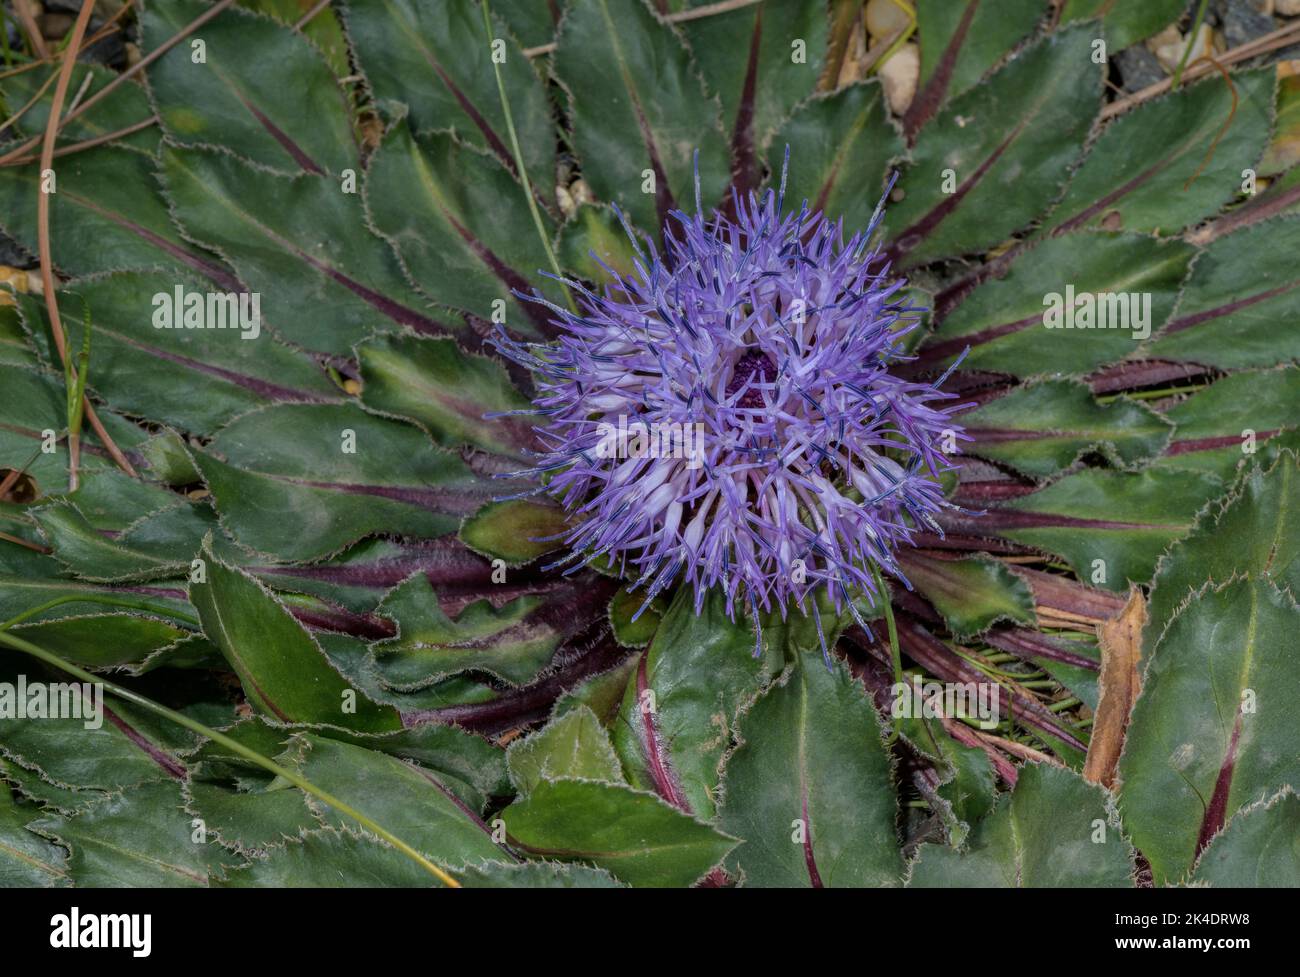 Carthamus rhaponticoides, endemic to Morocco and adjacent areas. Stock Photo